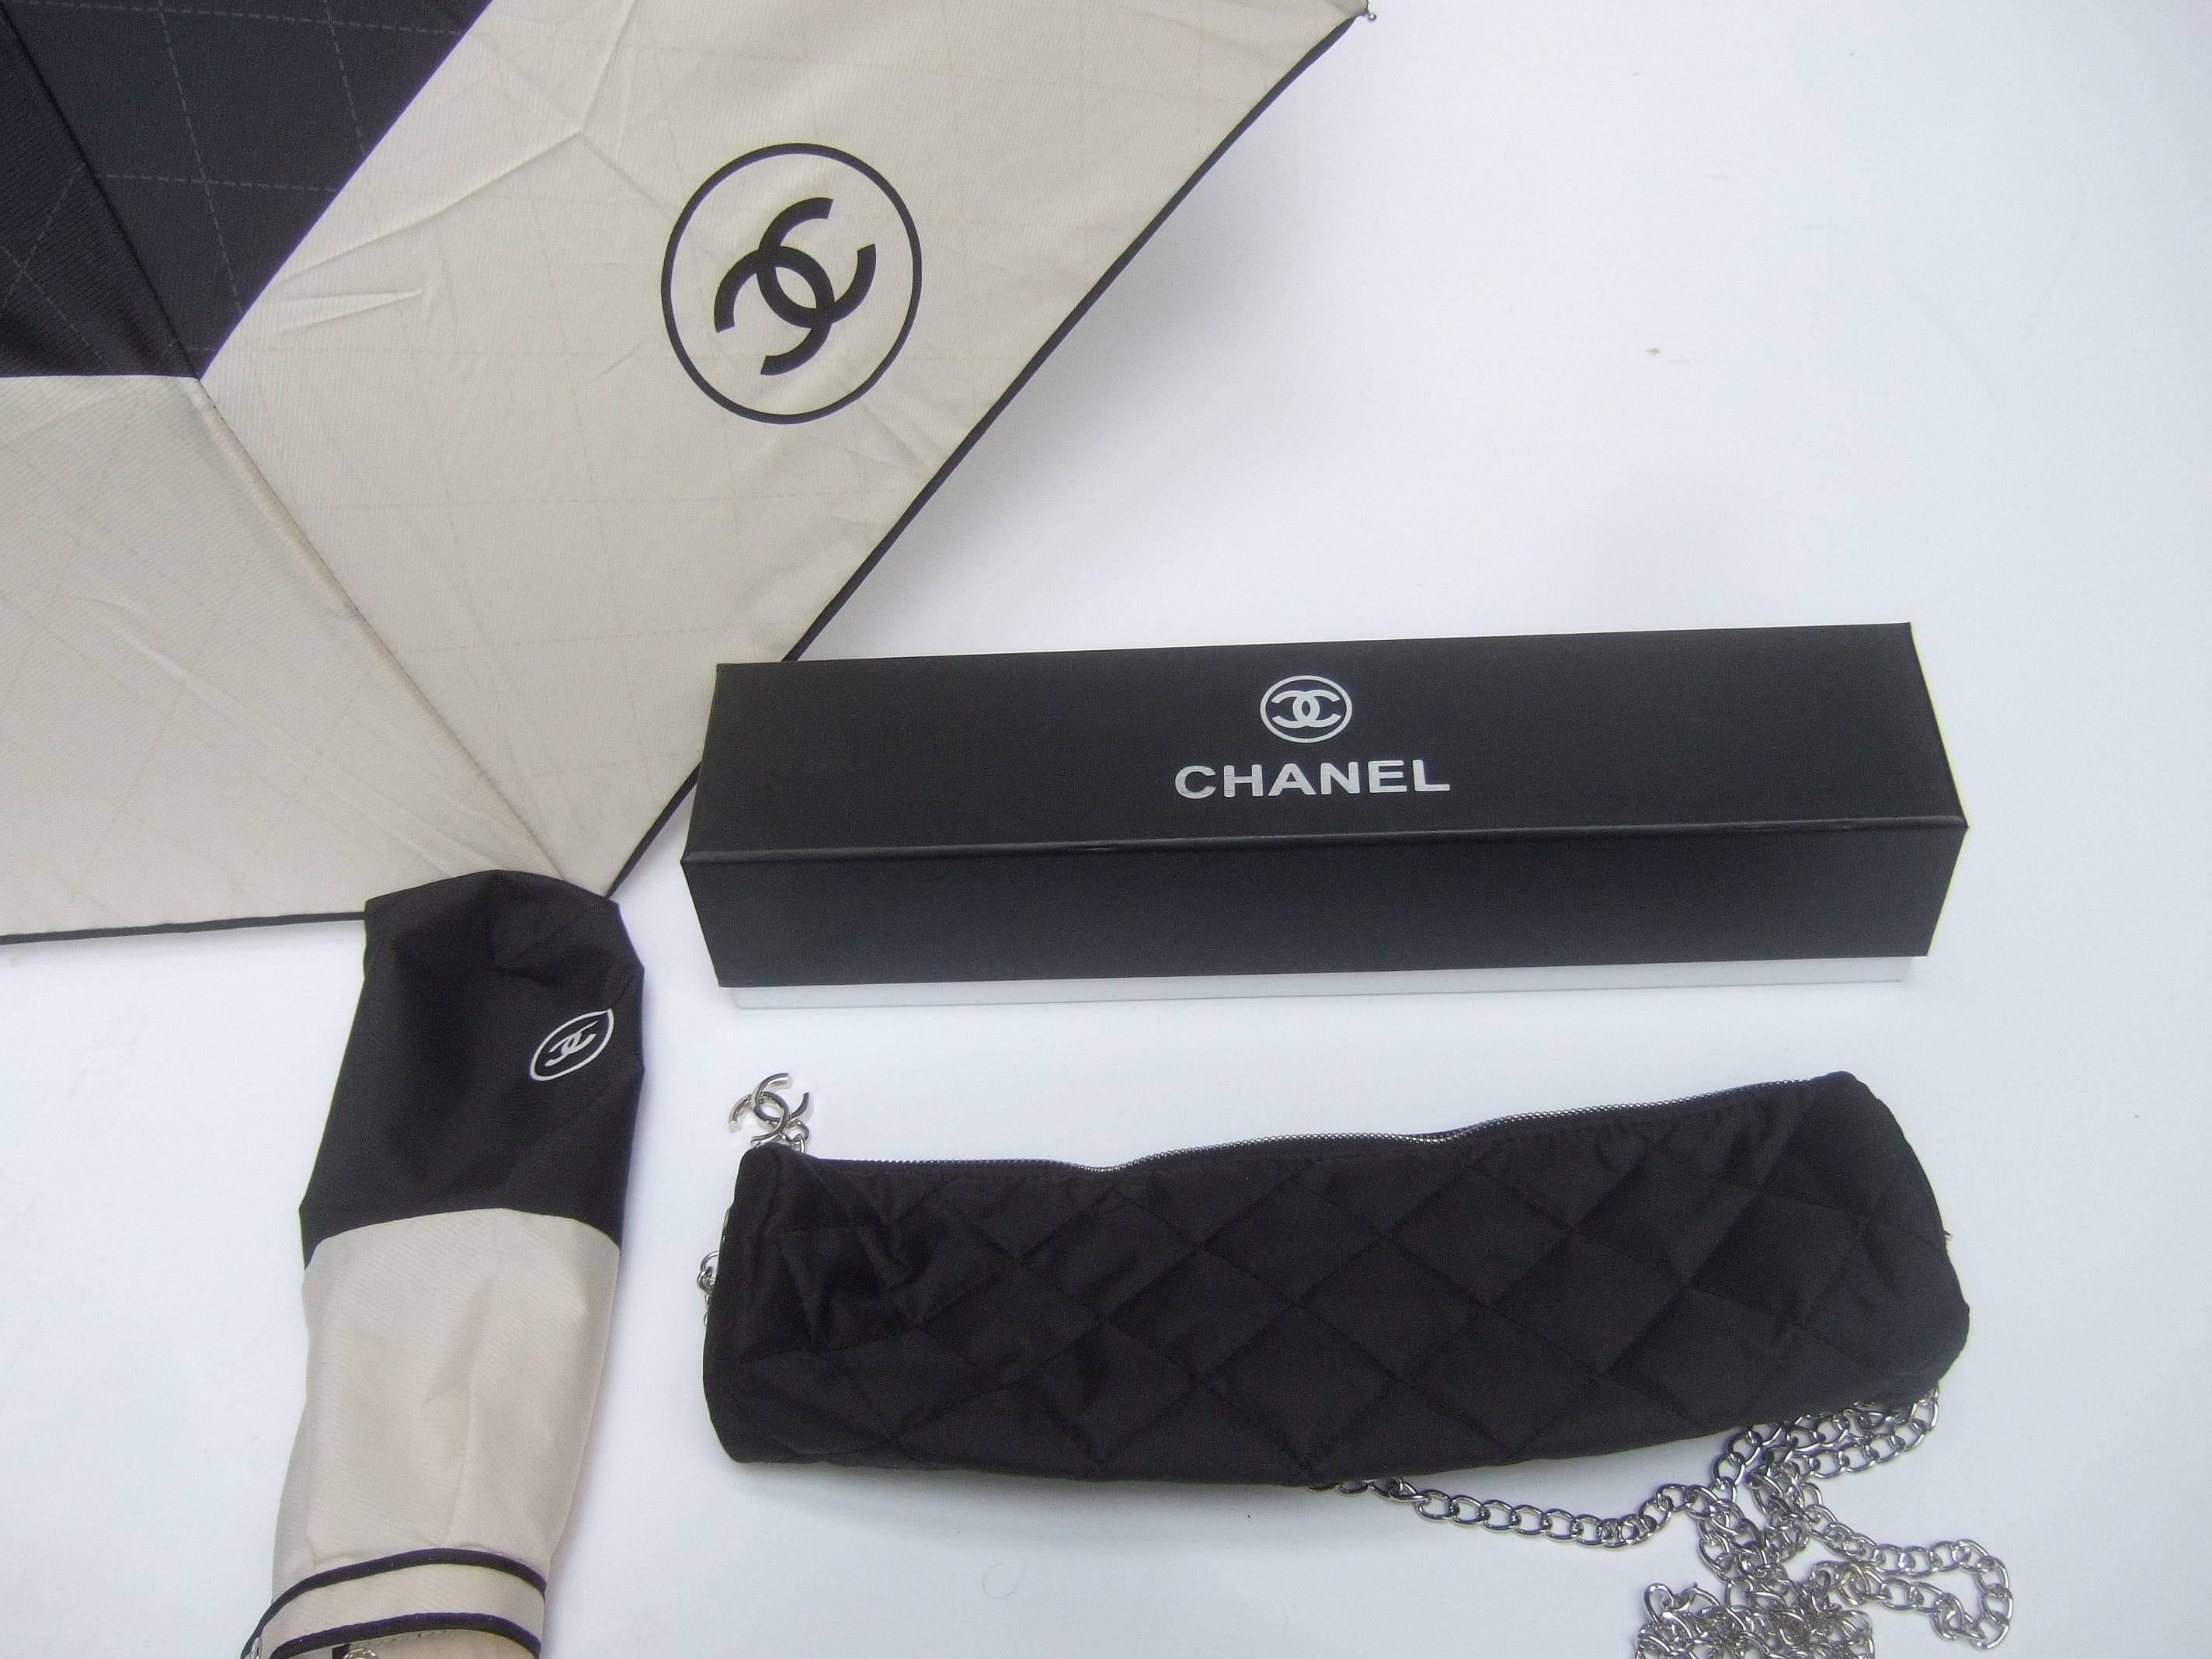 Chanel stylish black and ivory nylon umbrella in Chanel box
The chic umbrella comes with a quilted nylon carrying case 
on a silver metal chain strap. The umbrella can be carried in the
black quilted carrying case. The quilted nylon case has a